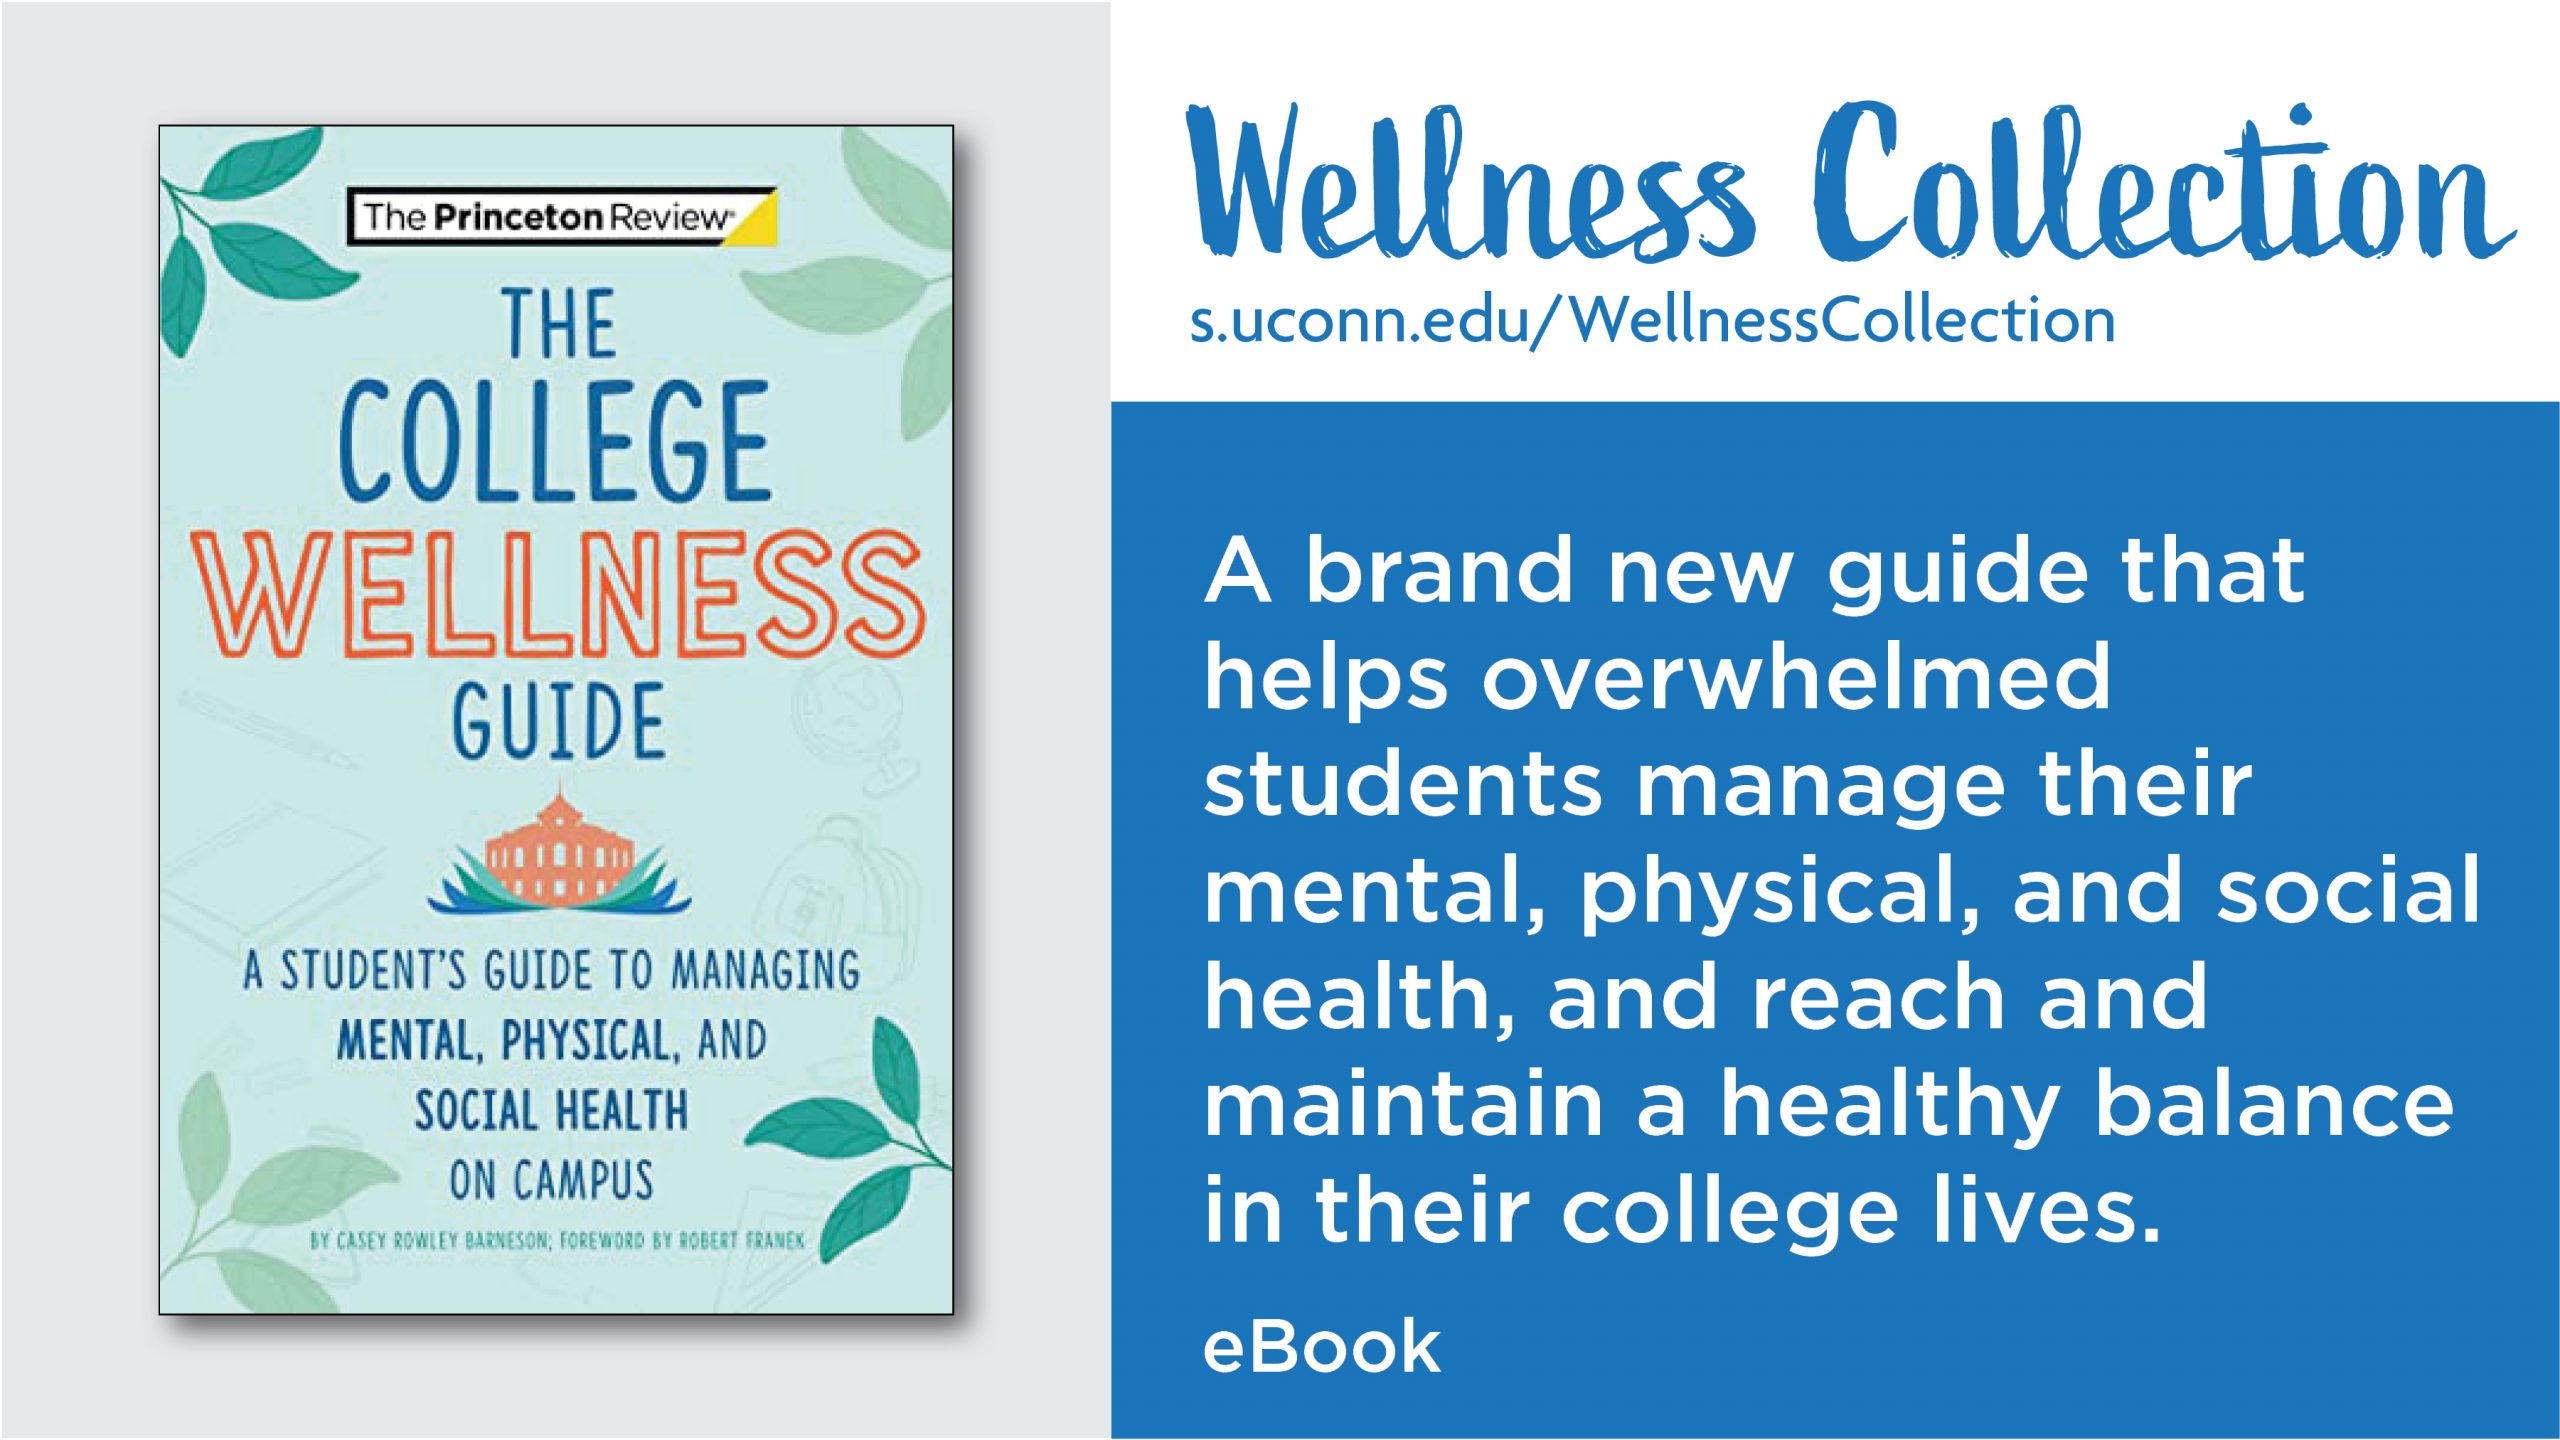 Image of book cover for The College Wellness Guide next to the text: A brand new guide that helps overwhelmed students manage their mental, physical, and social health, and reach and maintain a healthy balance in their college lives. eBook. Wellness Collection. s.uconn.edu/WellnessCollection